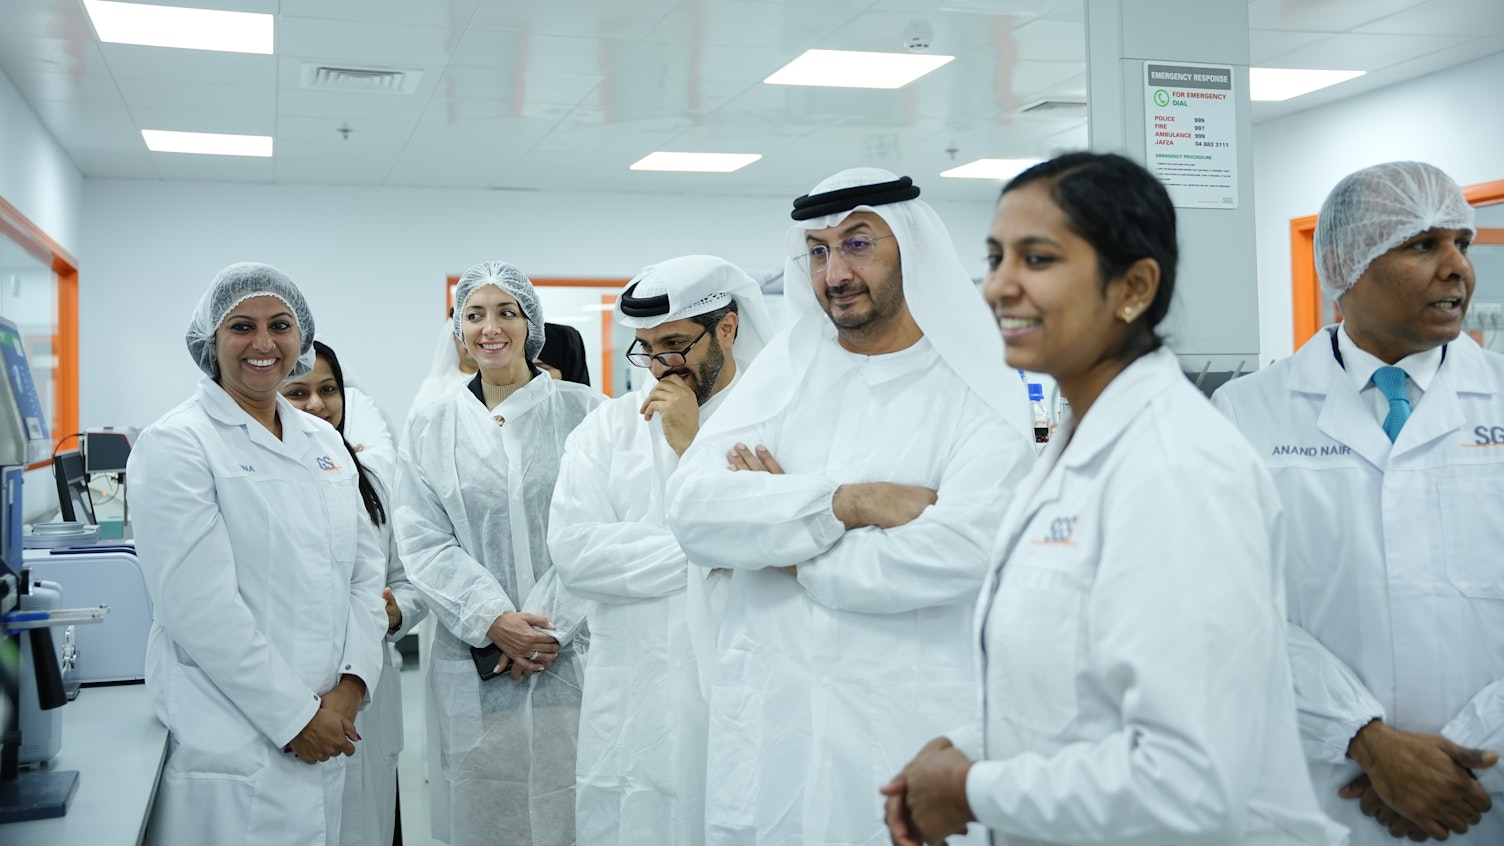 UAE Ministry of Economy Delegation Visits SGS Multi-Lab in Dubai to Enhance Consumer Safety